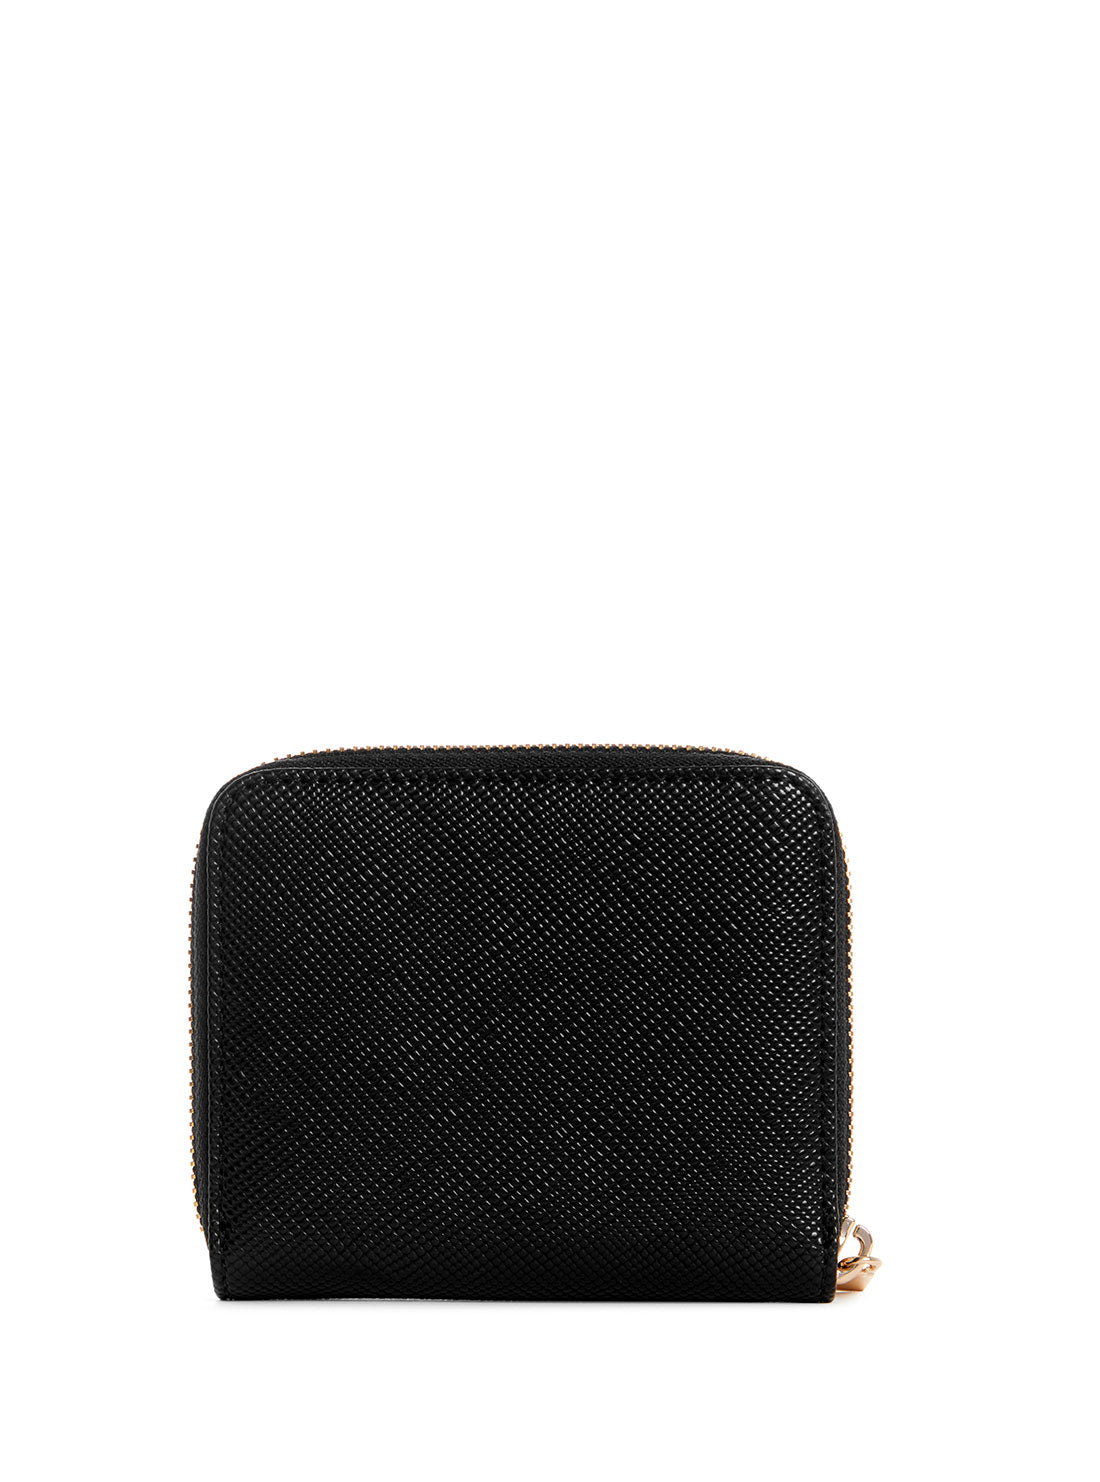 GUESS Black Laurel Small Wallet back view